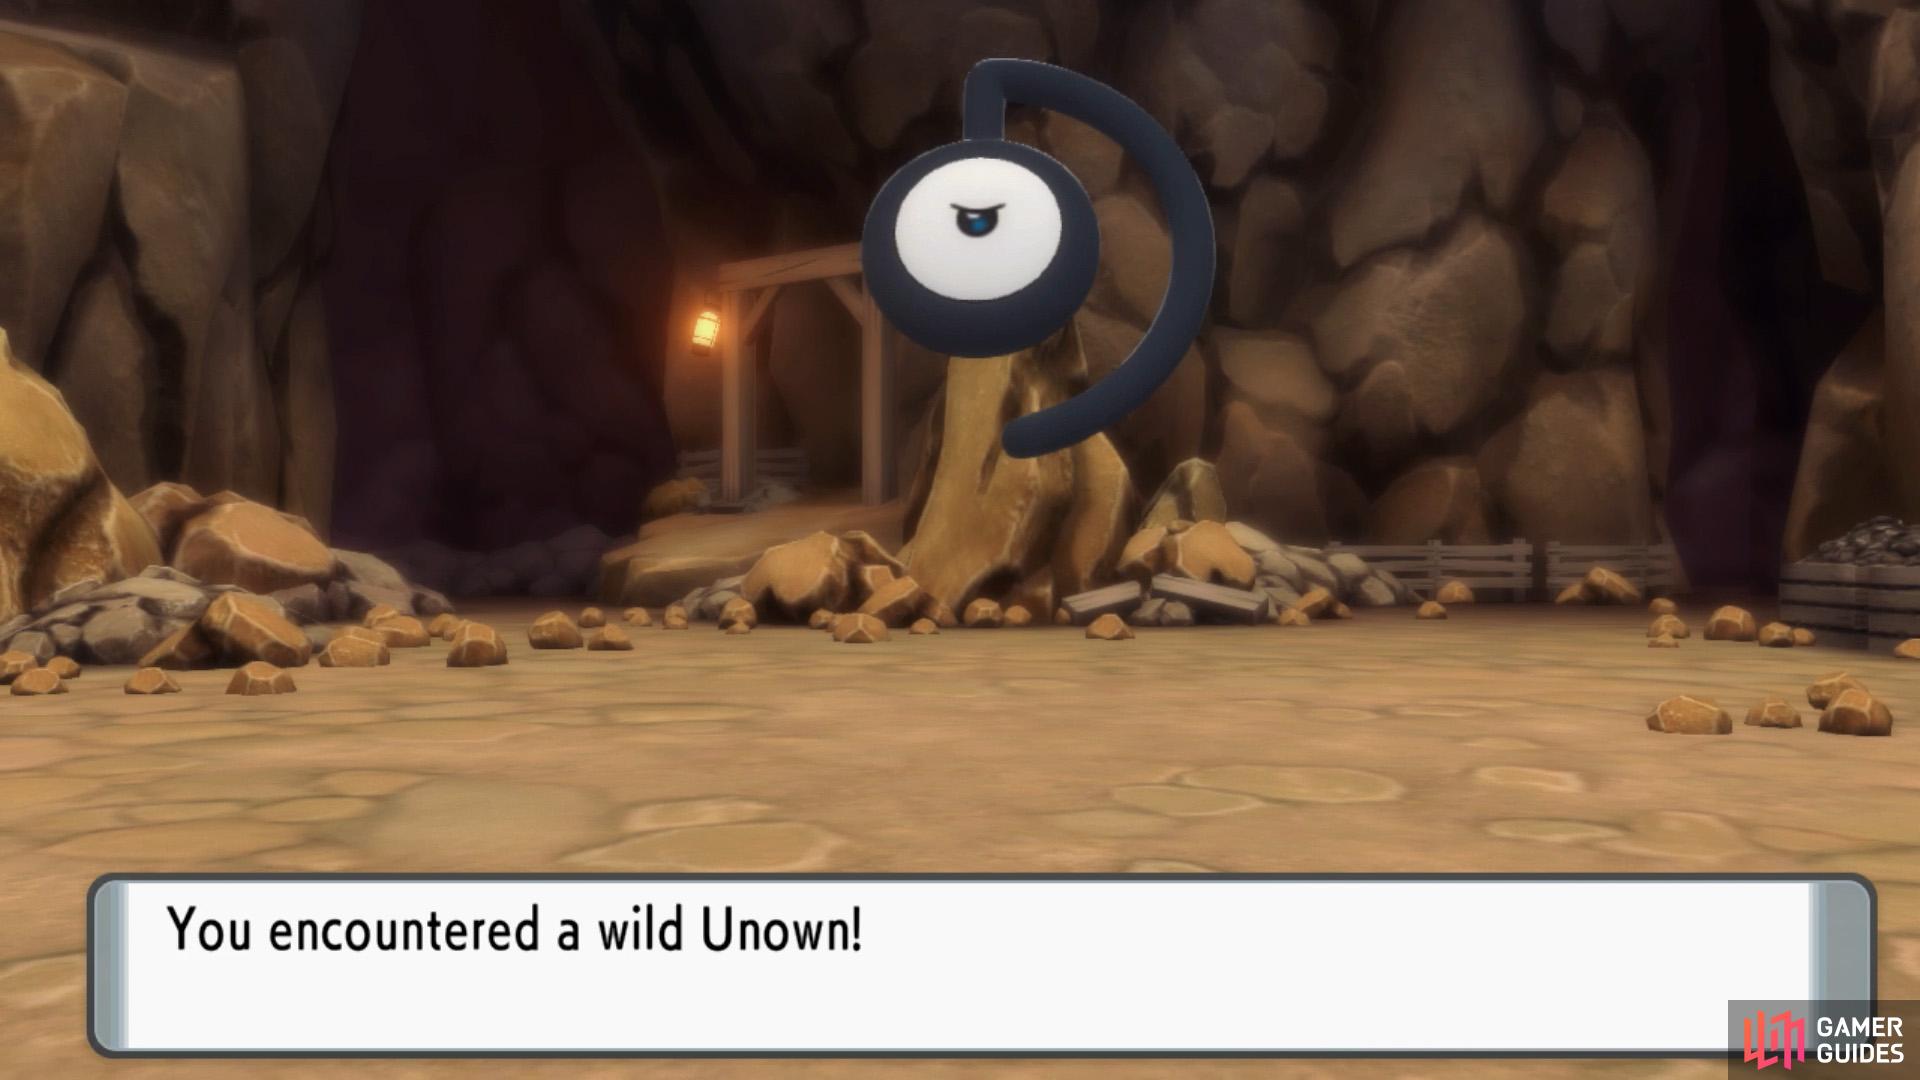 Unown can be found in every room sans the entrance.